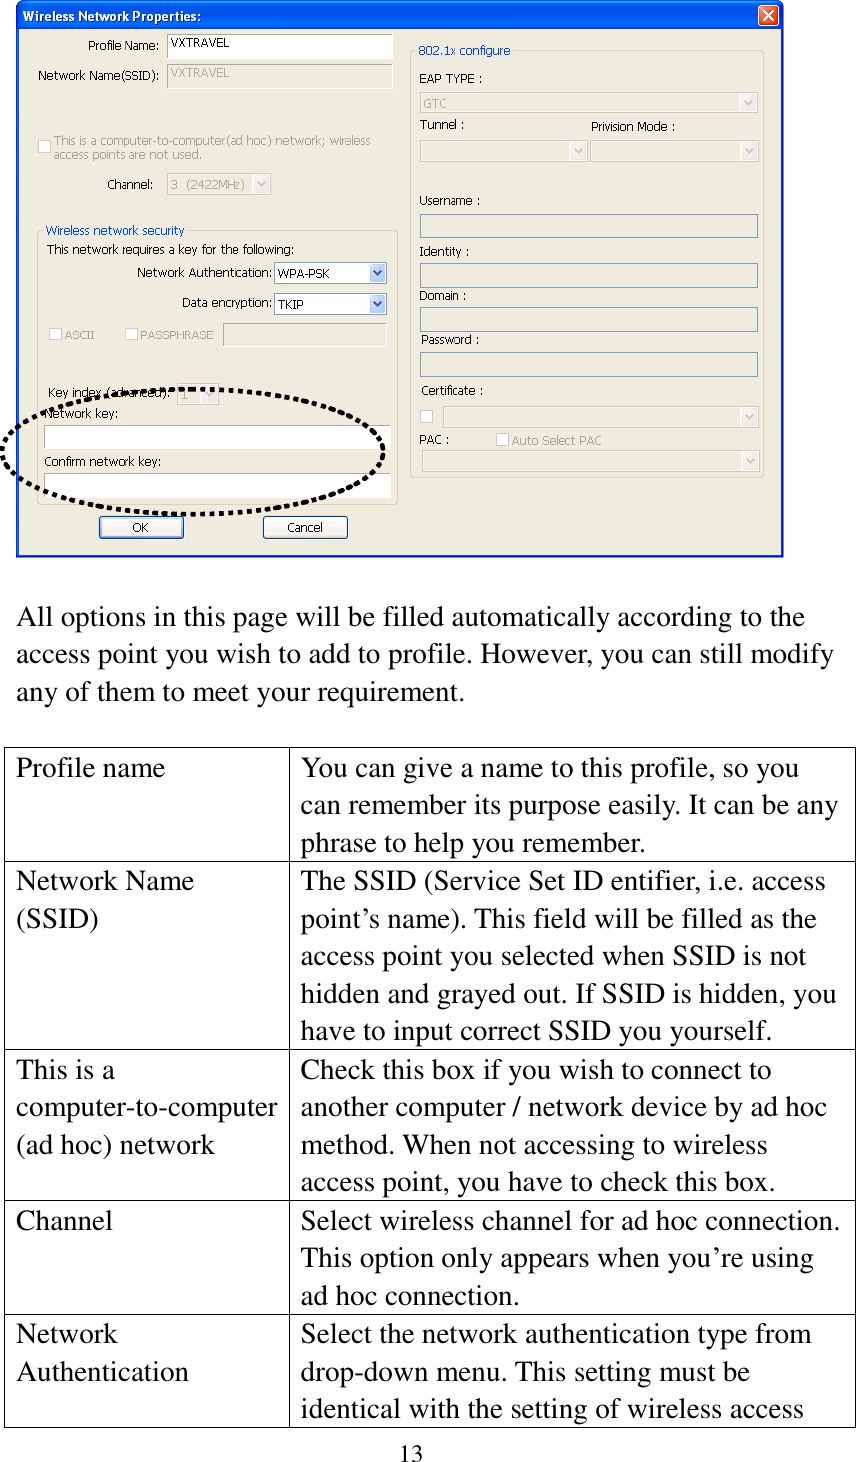 13    All options in this page will be filled automatically according to the access point you wish to add to profile. However, you can still modify any of them to meet your requirement.  Profile name You can give a name to this profile, so you can remember its purpose easily. It can be any phrase to help you remember. Network Name (SSID) The SSID (Service Set ID entifier, i.e. access point’s name). This field will be filled as the access point you selected when SSID is not hidden and grayed out. If SSID is hidden, you have to input correct SSID you yourself. This is a computer-to-computer (ad hoc) network Check this box if you wish to connect to another computer / network device by ad hoc method. When not accessing to wireless access point, you have to check this box. Channel Select wireless channel for ad hoc connection. This option only appears when you’re using ad hoc connection. Network   Authentication Select the network authentication type from drop-down menu. This setting must be identical with the setting of wireless access 